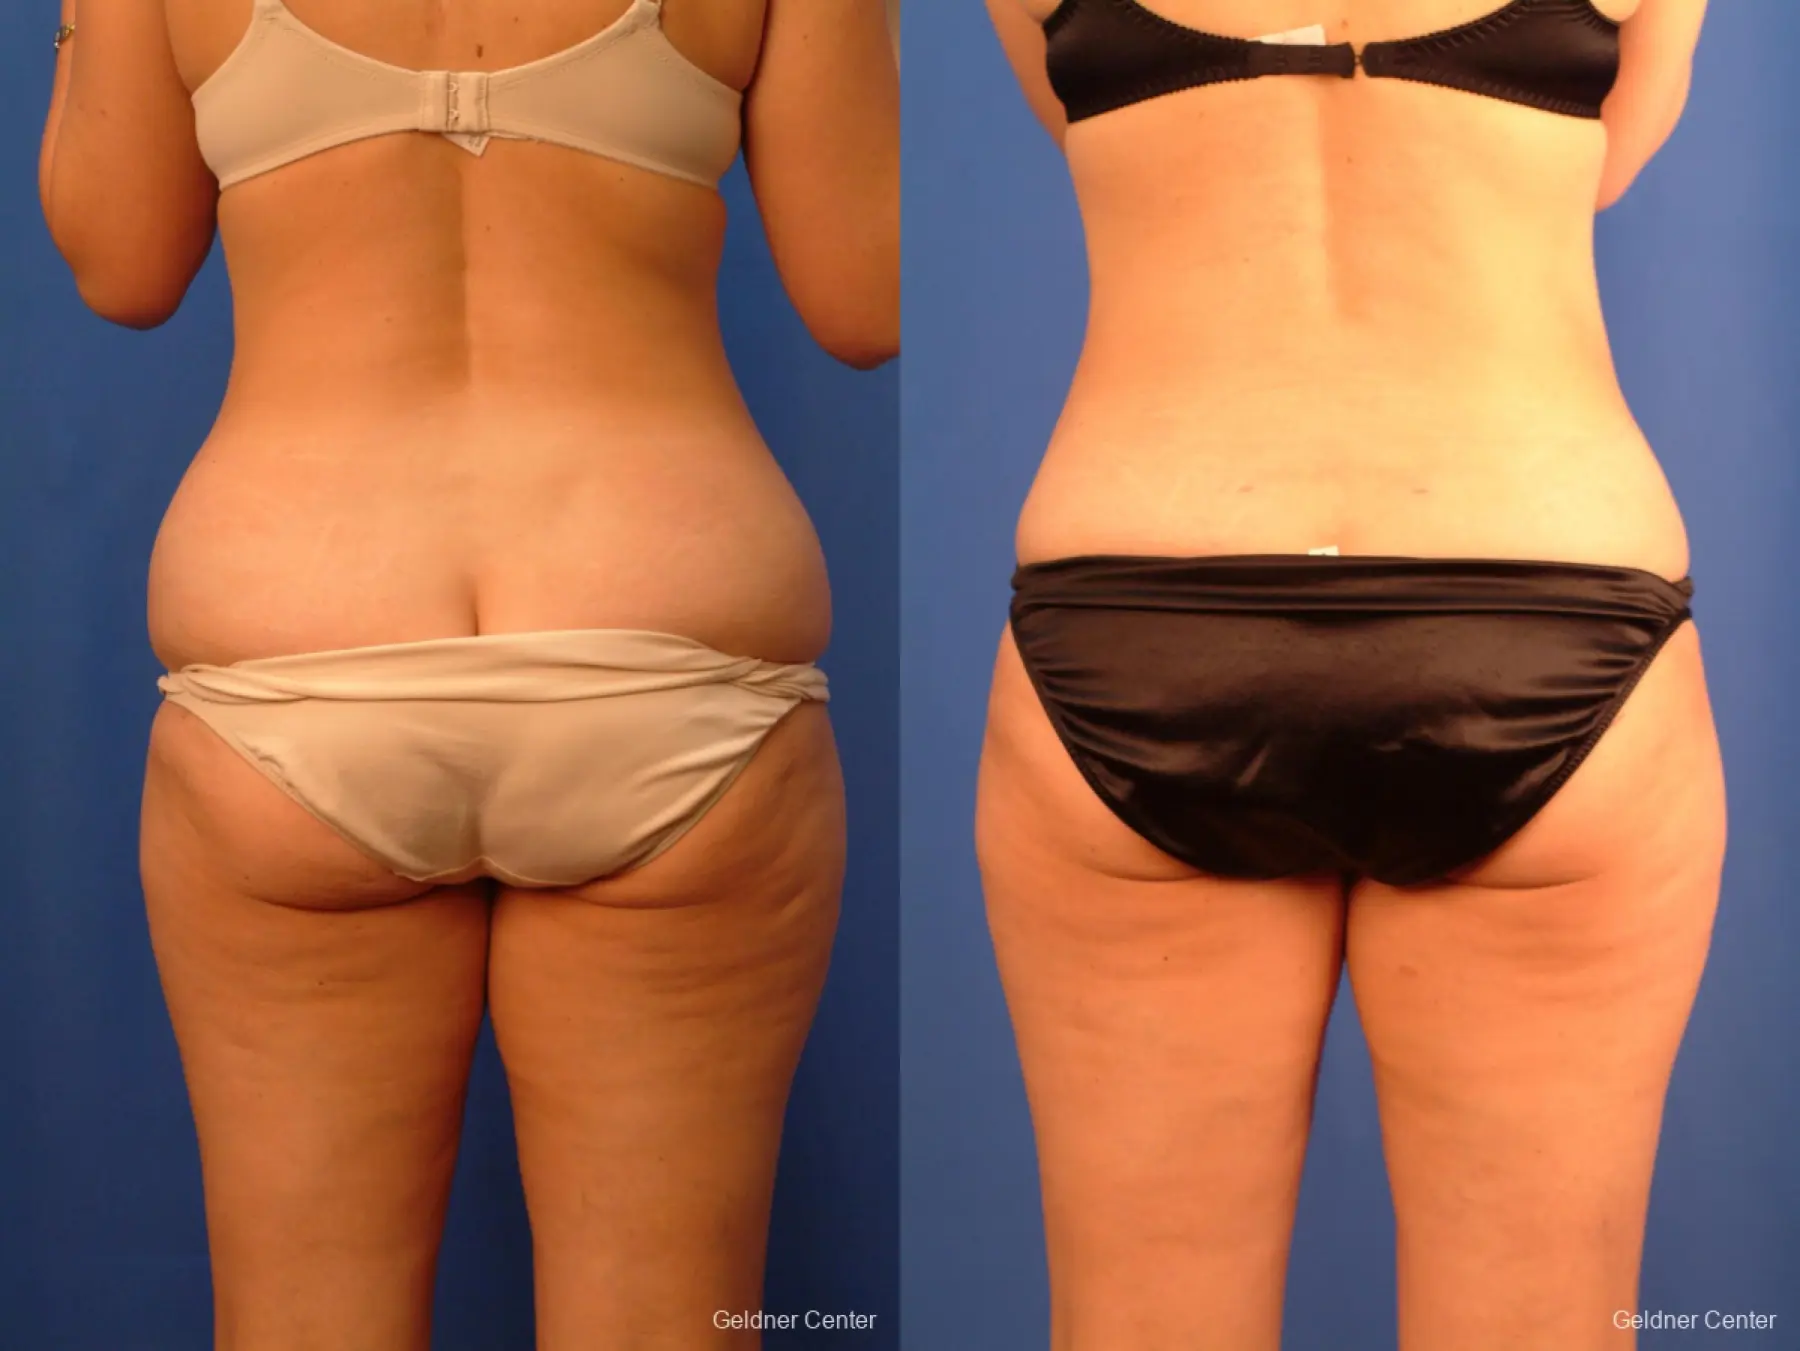 Vaser lipo patient 2520 before and after photos - Before and After 4